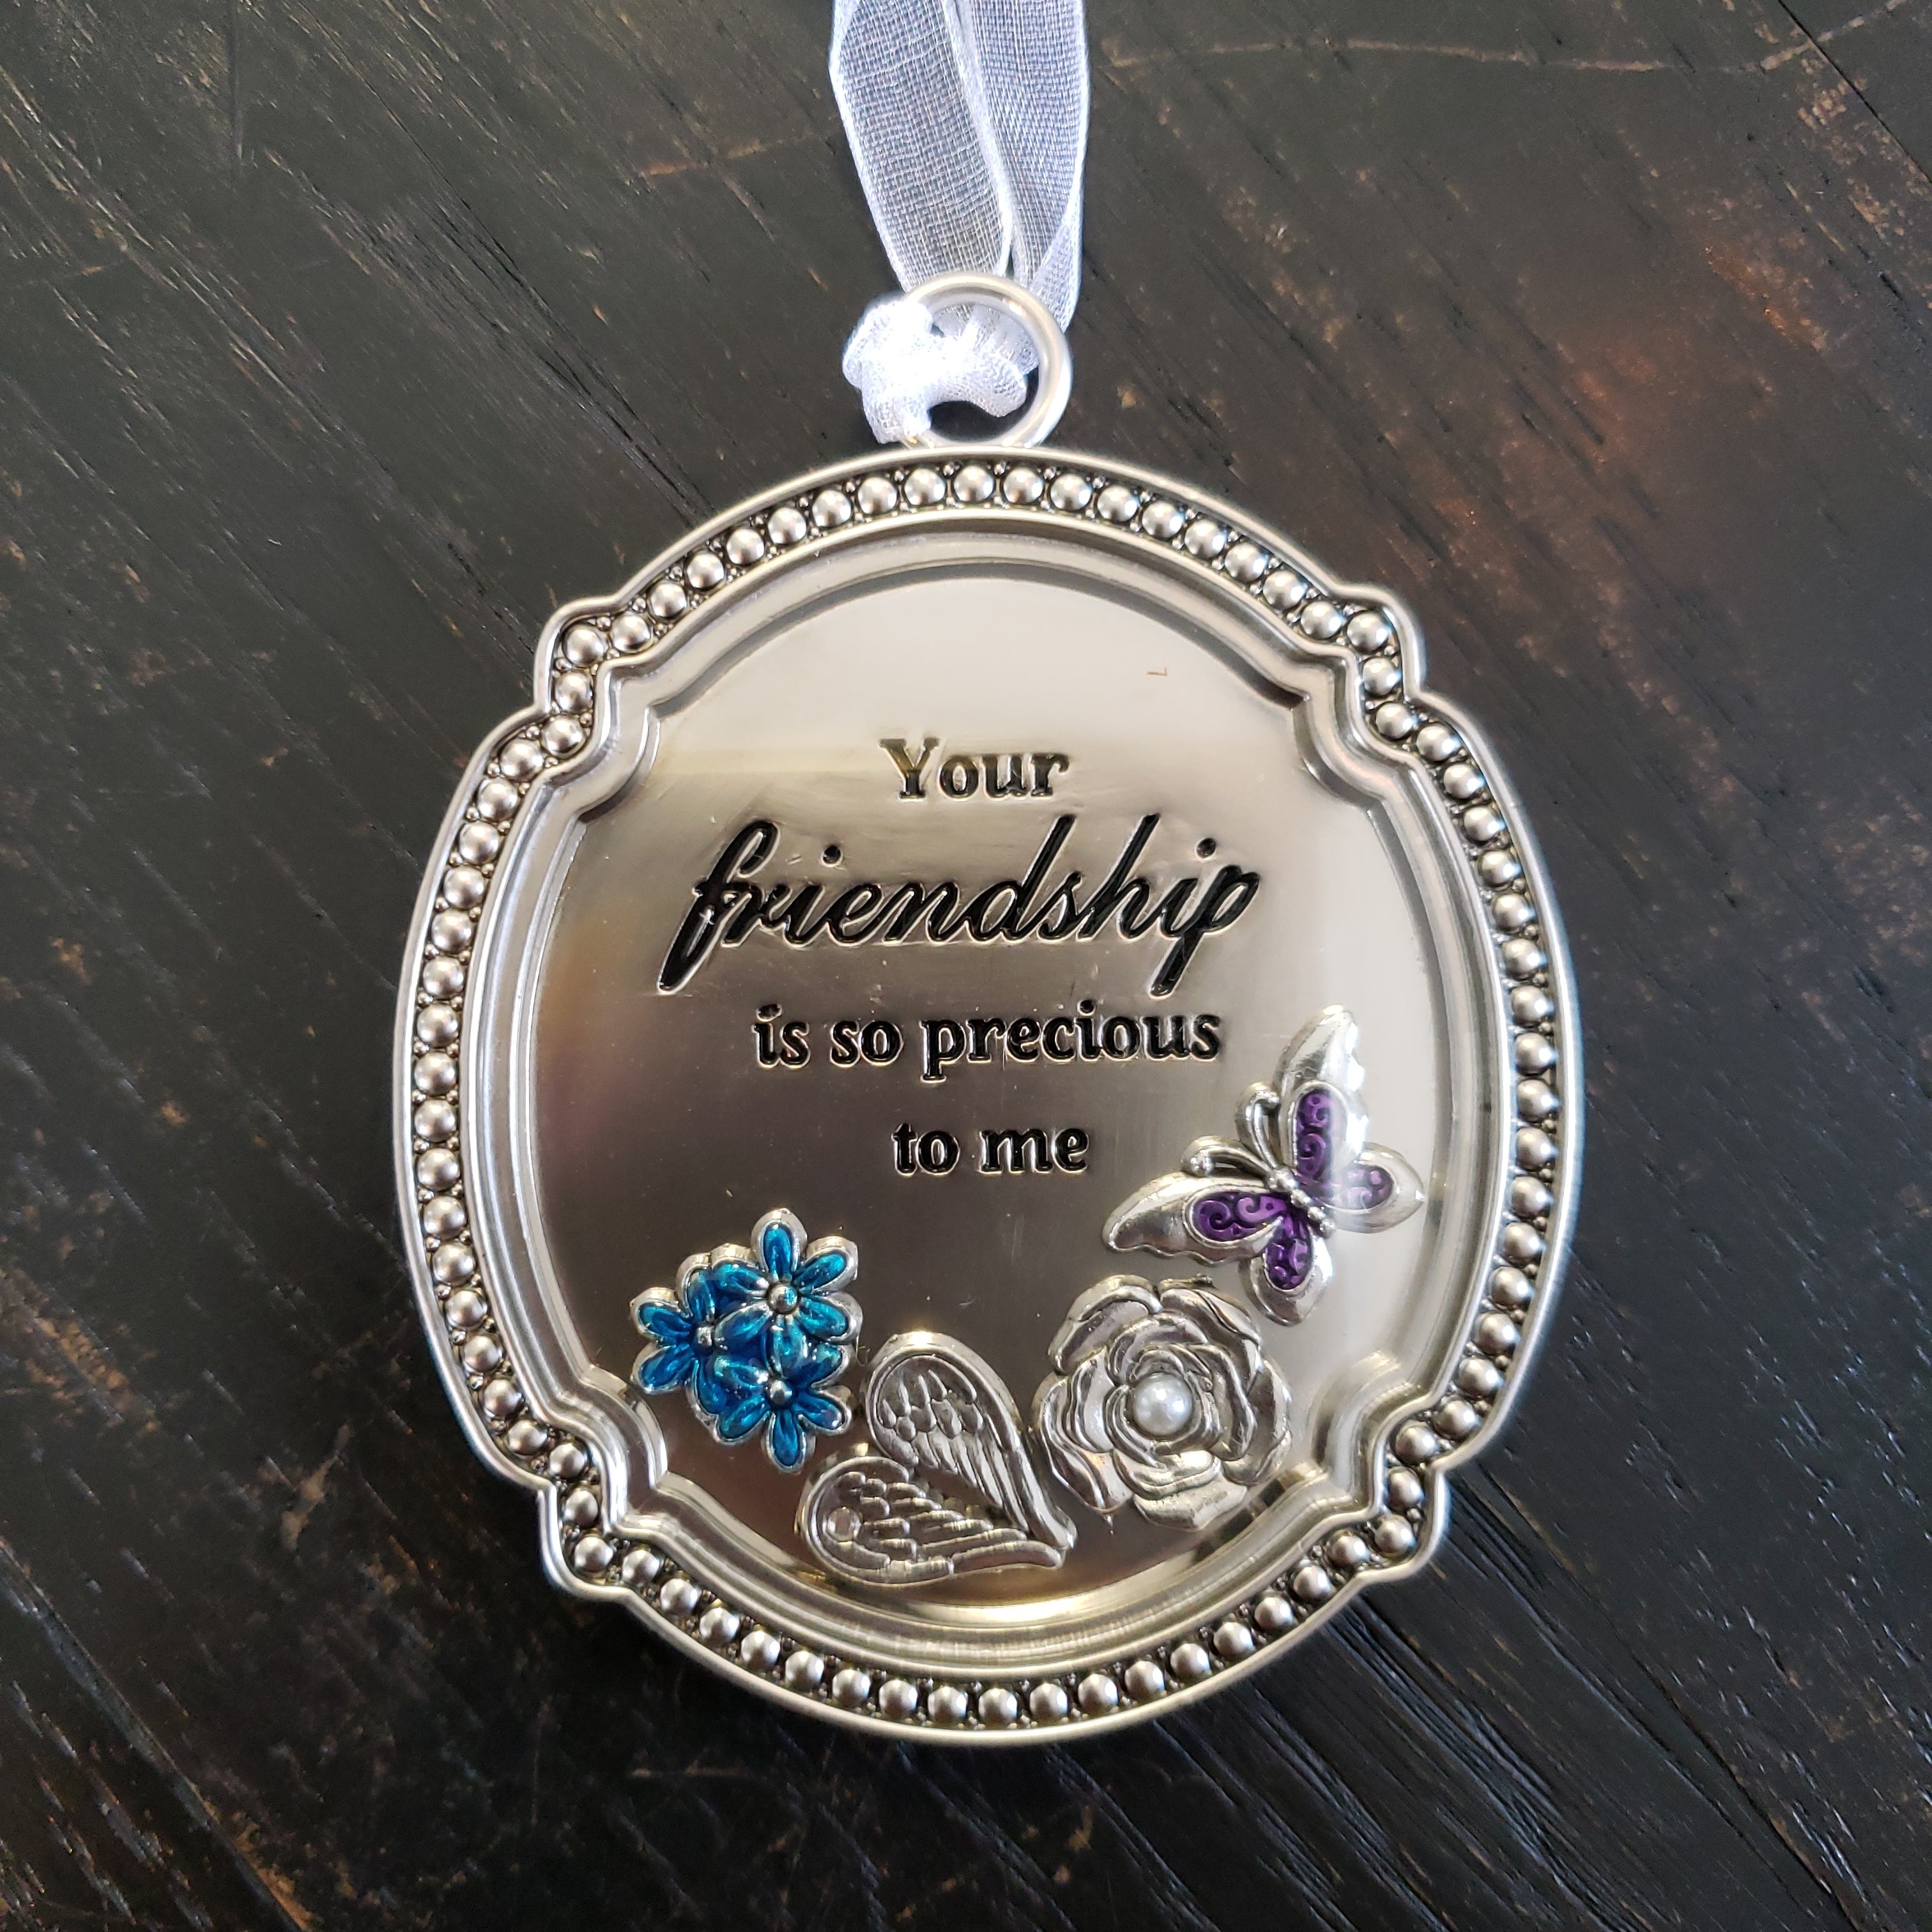 Your friendship